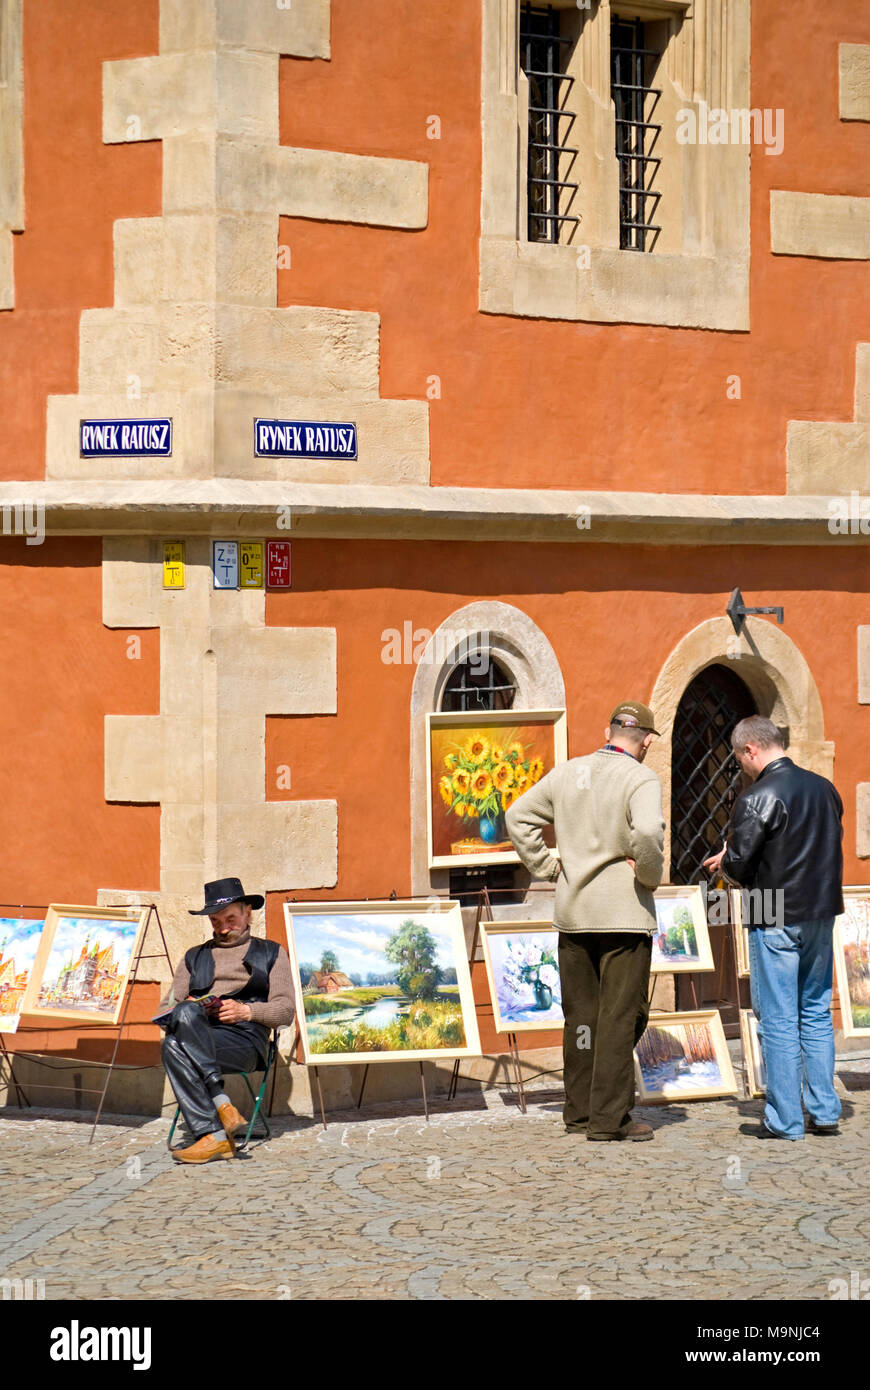 Wroclaw, Silesia, Poland. Artist selling paintings in front of the Town Hall, Rynek Ratusz Stock Photo